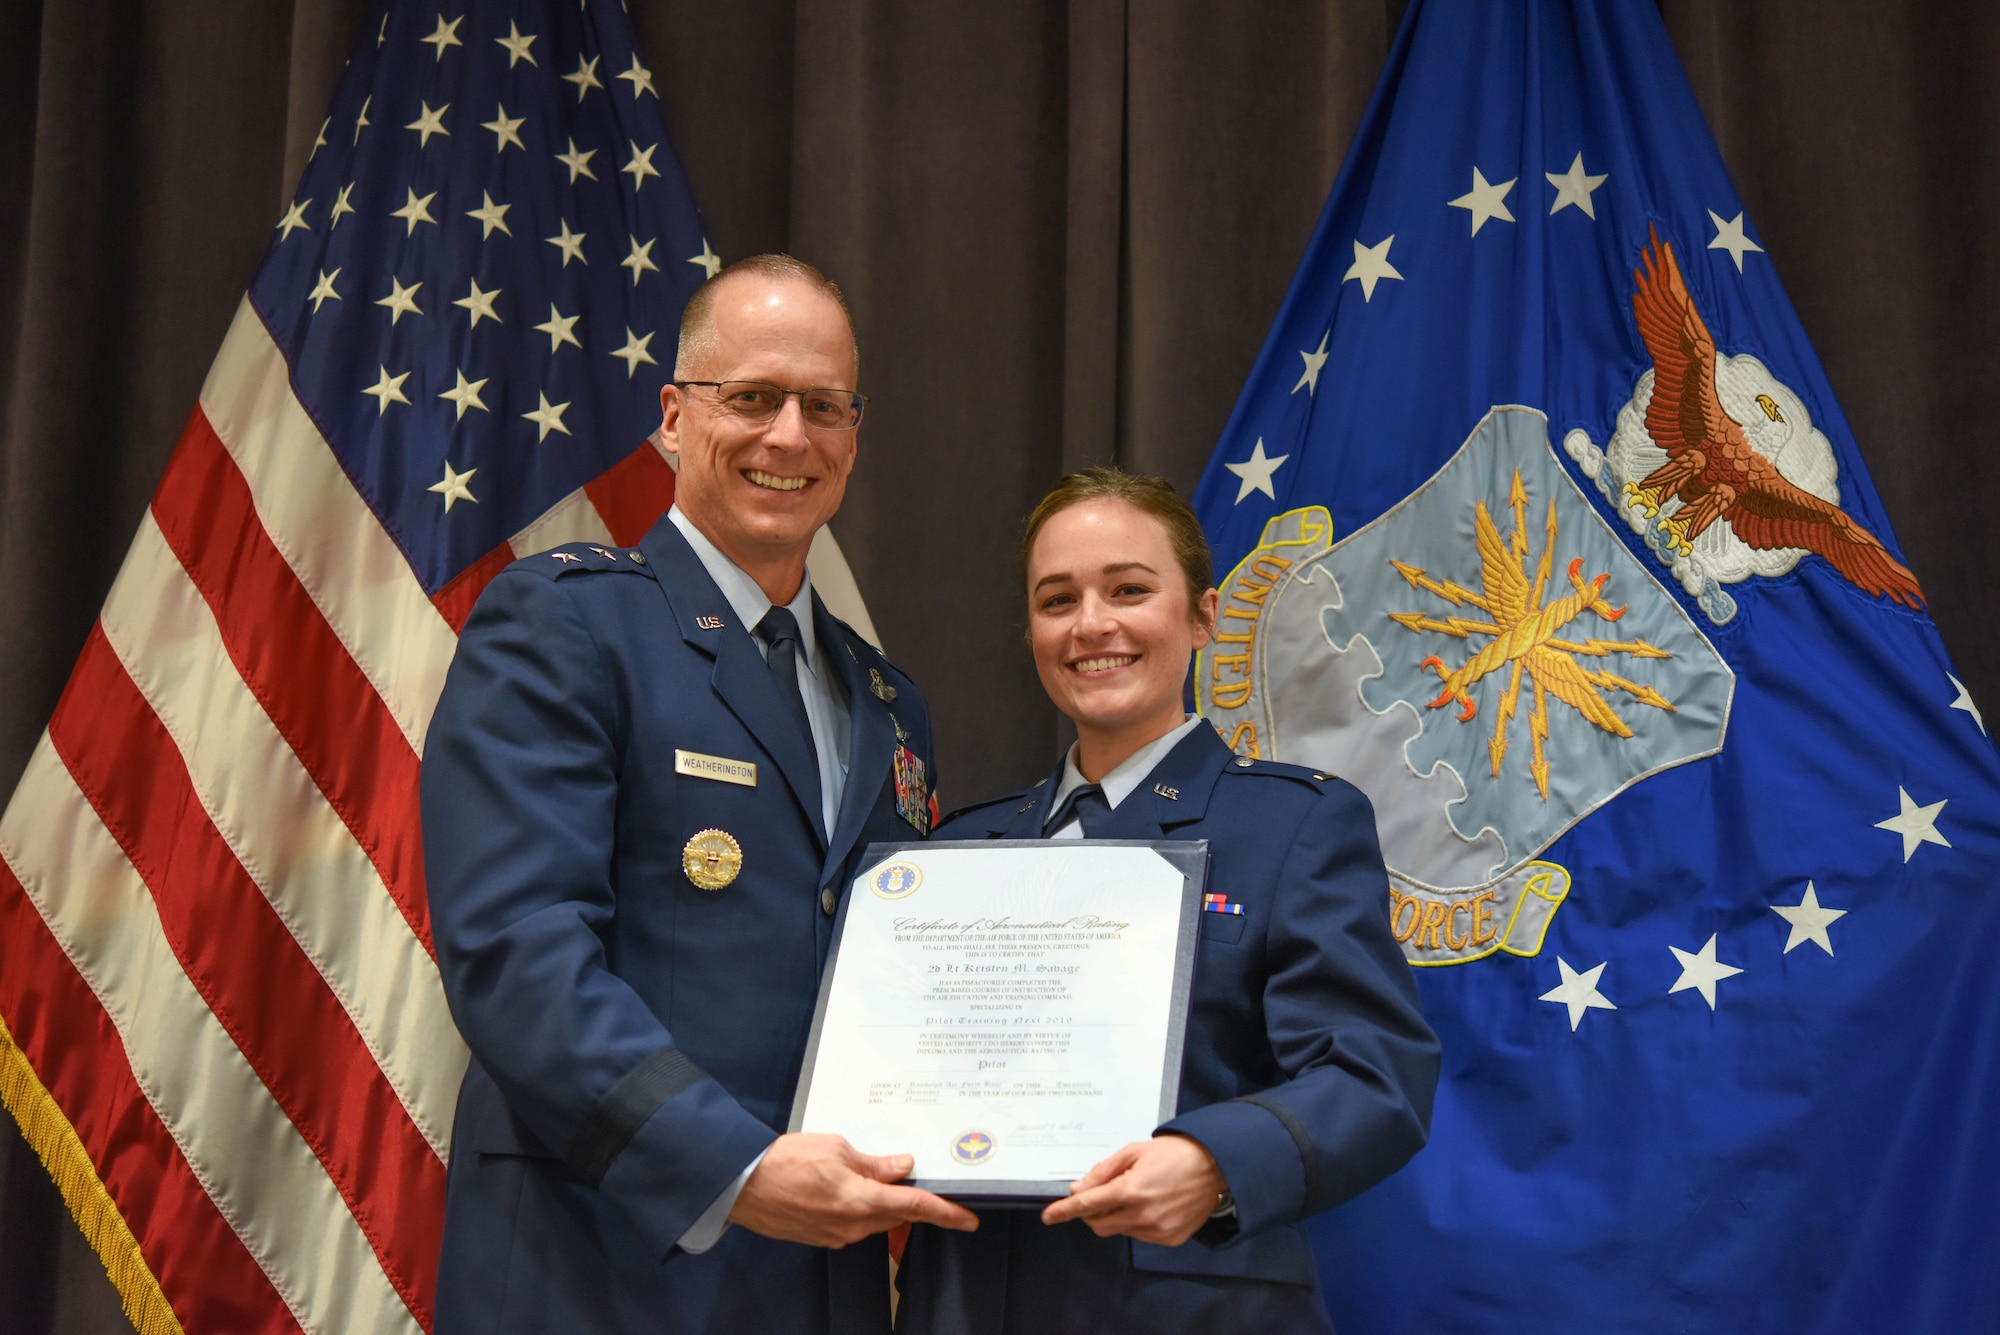 Maj. Gen. Mark Weatherington, Air Education and Training Command deputy commander, presents 2nd Lt. Kristen Savage with her pilot’s wings during a dual commissioning and “winging” ceremony Dec. 19, 2019, at Maxwell Air Force Base, Alabama. Savage was a student pilot who graduated PTN version 2, an Air Education and Training Command program to explore what is possible in training with the use of innovative technology and how it can be applied to not only pilot training but also to training across AETC.  She earned her wings, but couldn’t wear them until she commissioned. (U.S. Air Force photo by Staff Sgt. Quay Drawdy)